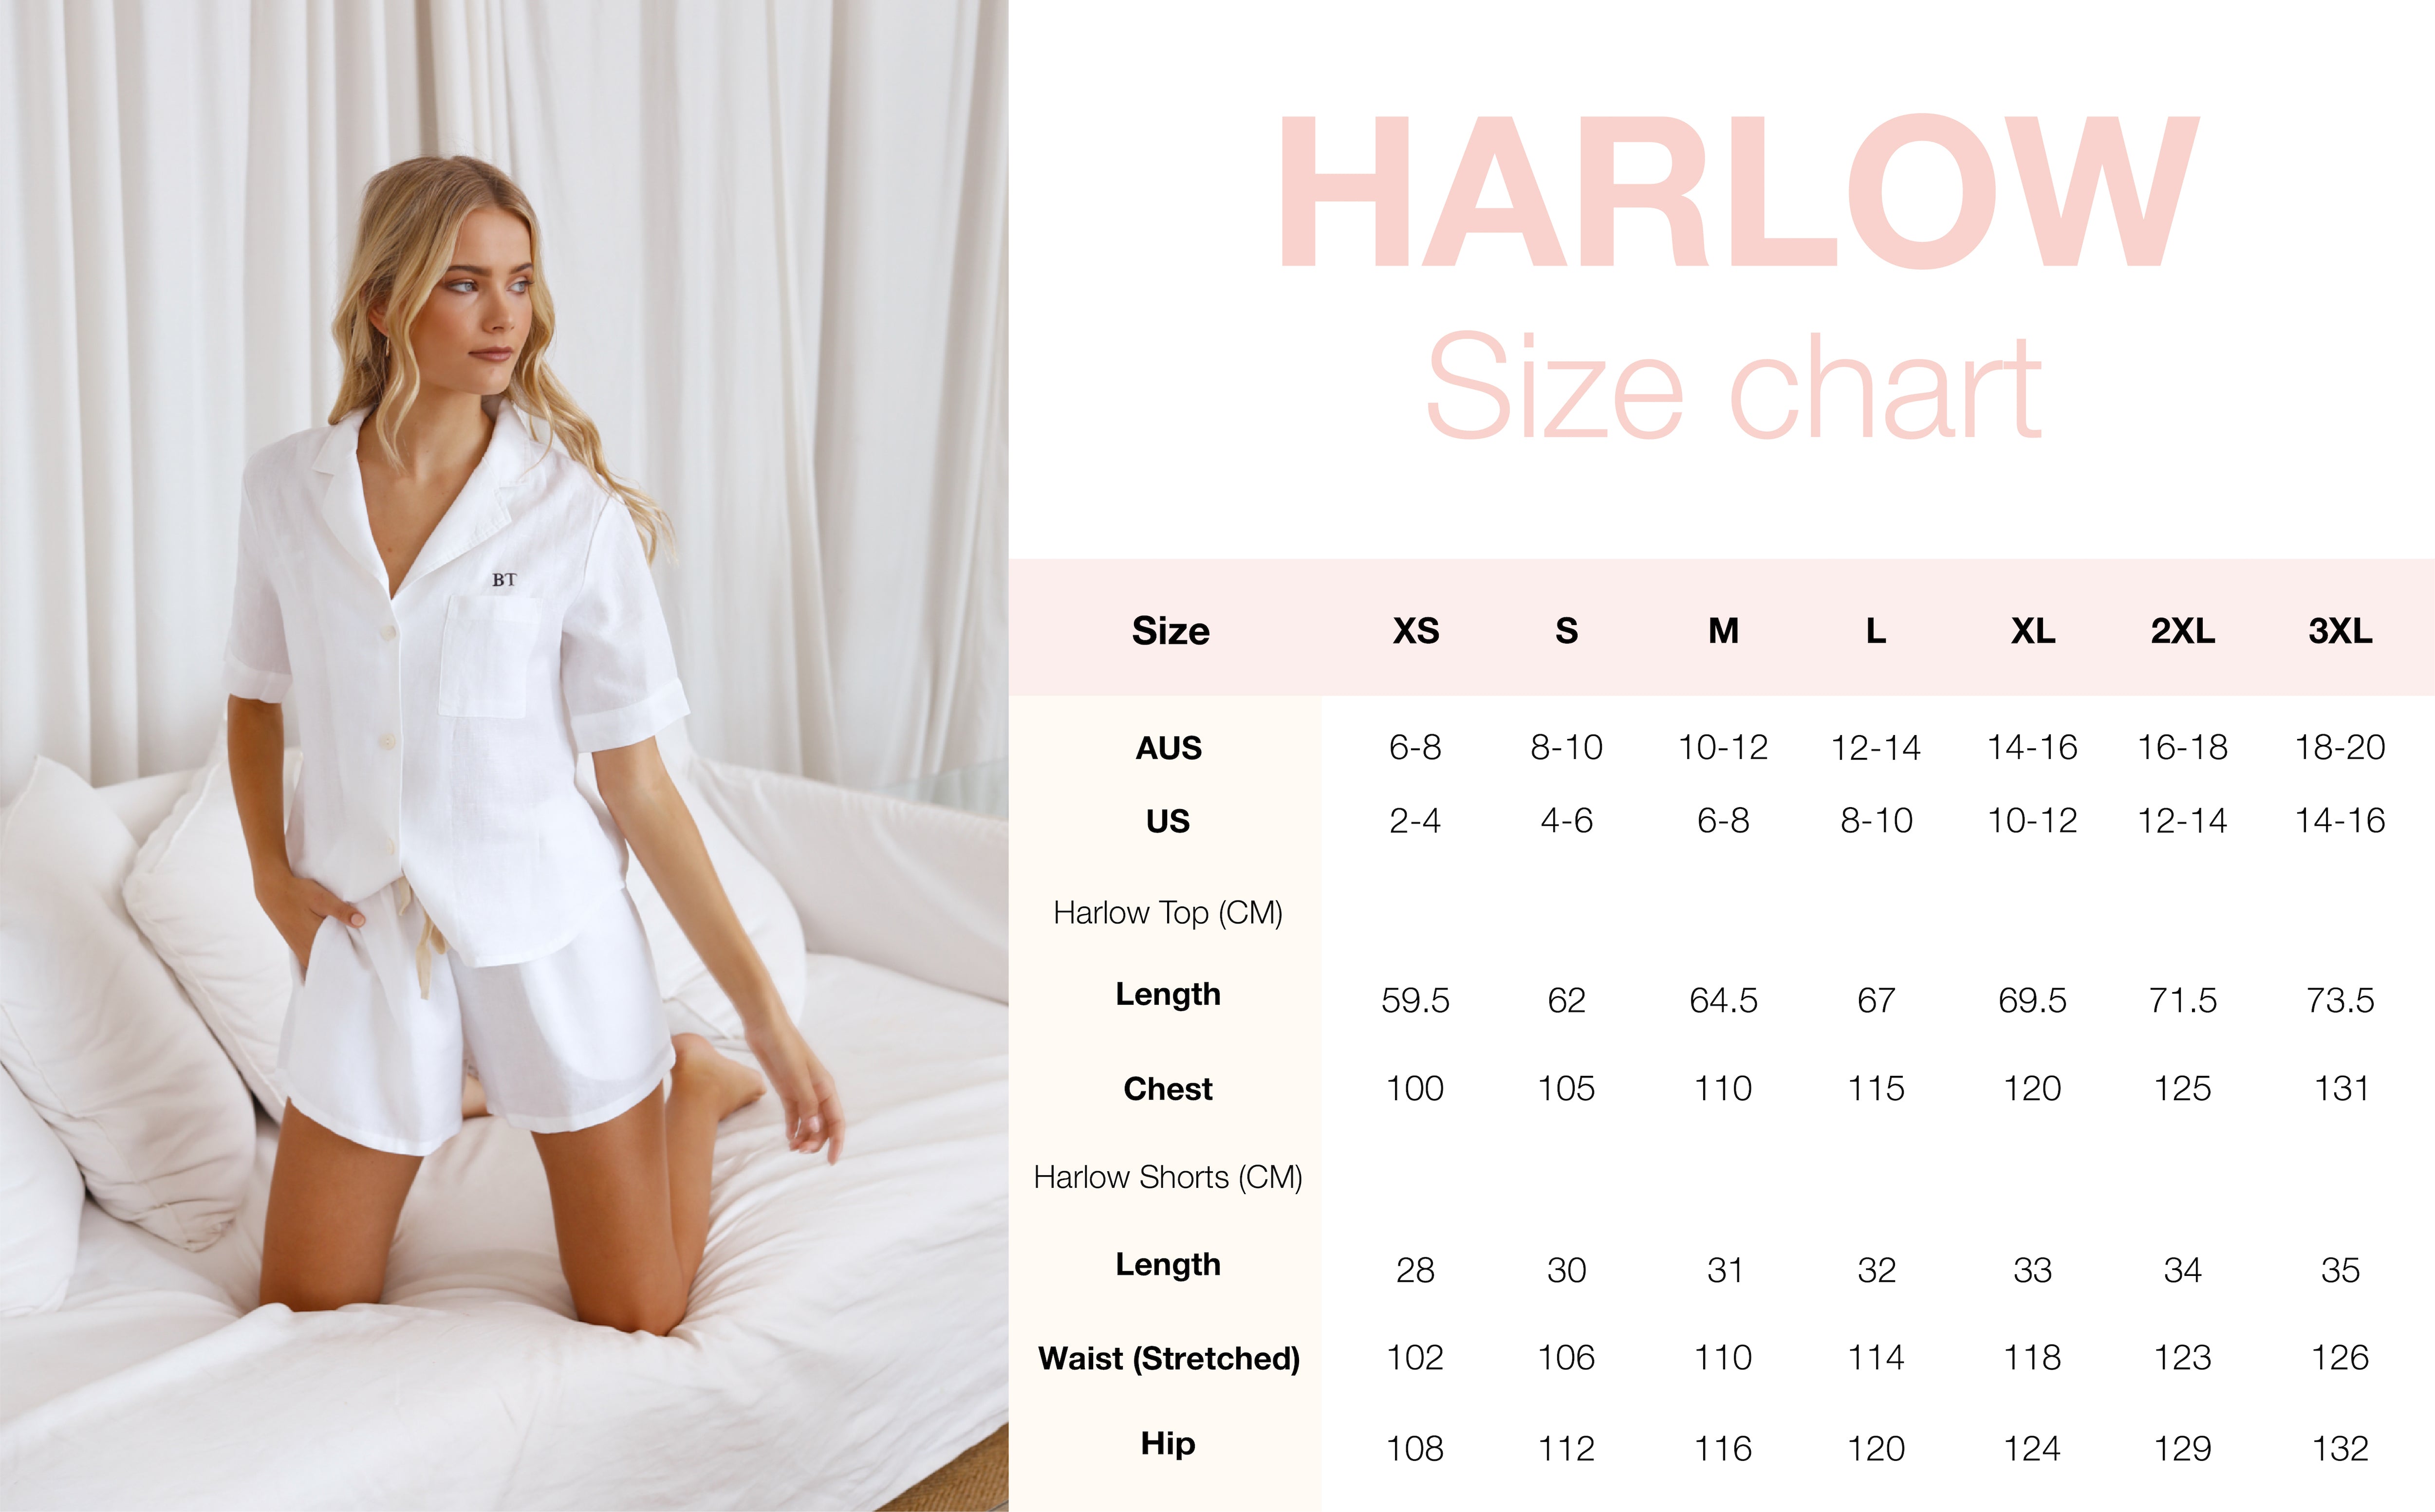 This displays the sizing guide of our Harlow linen set, ranging from size 6 to size 20.